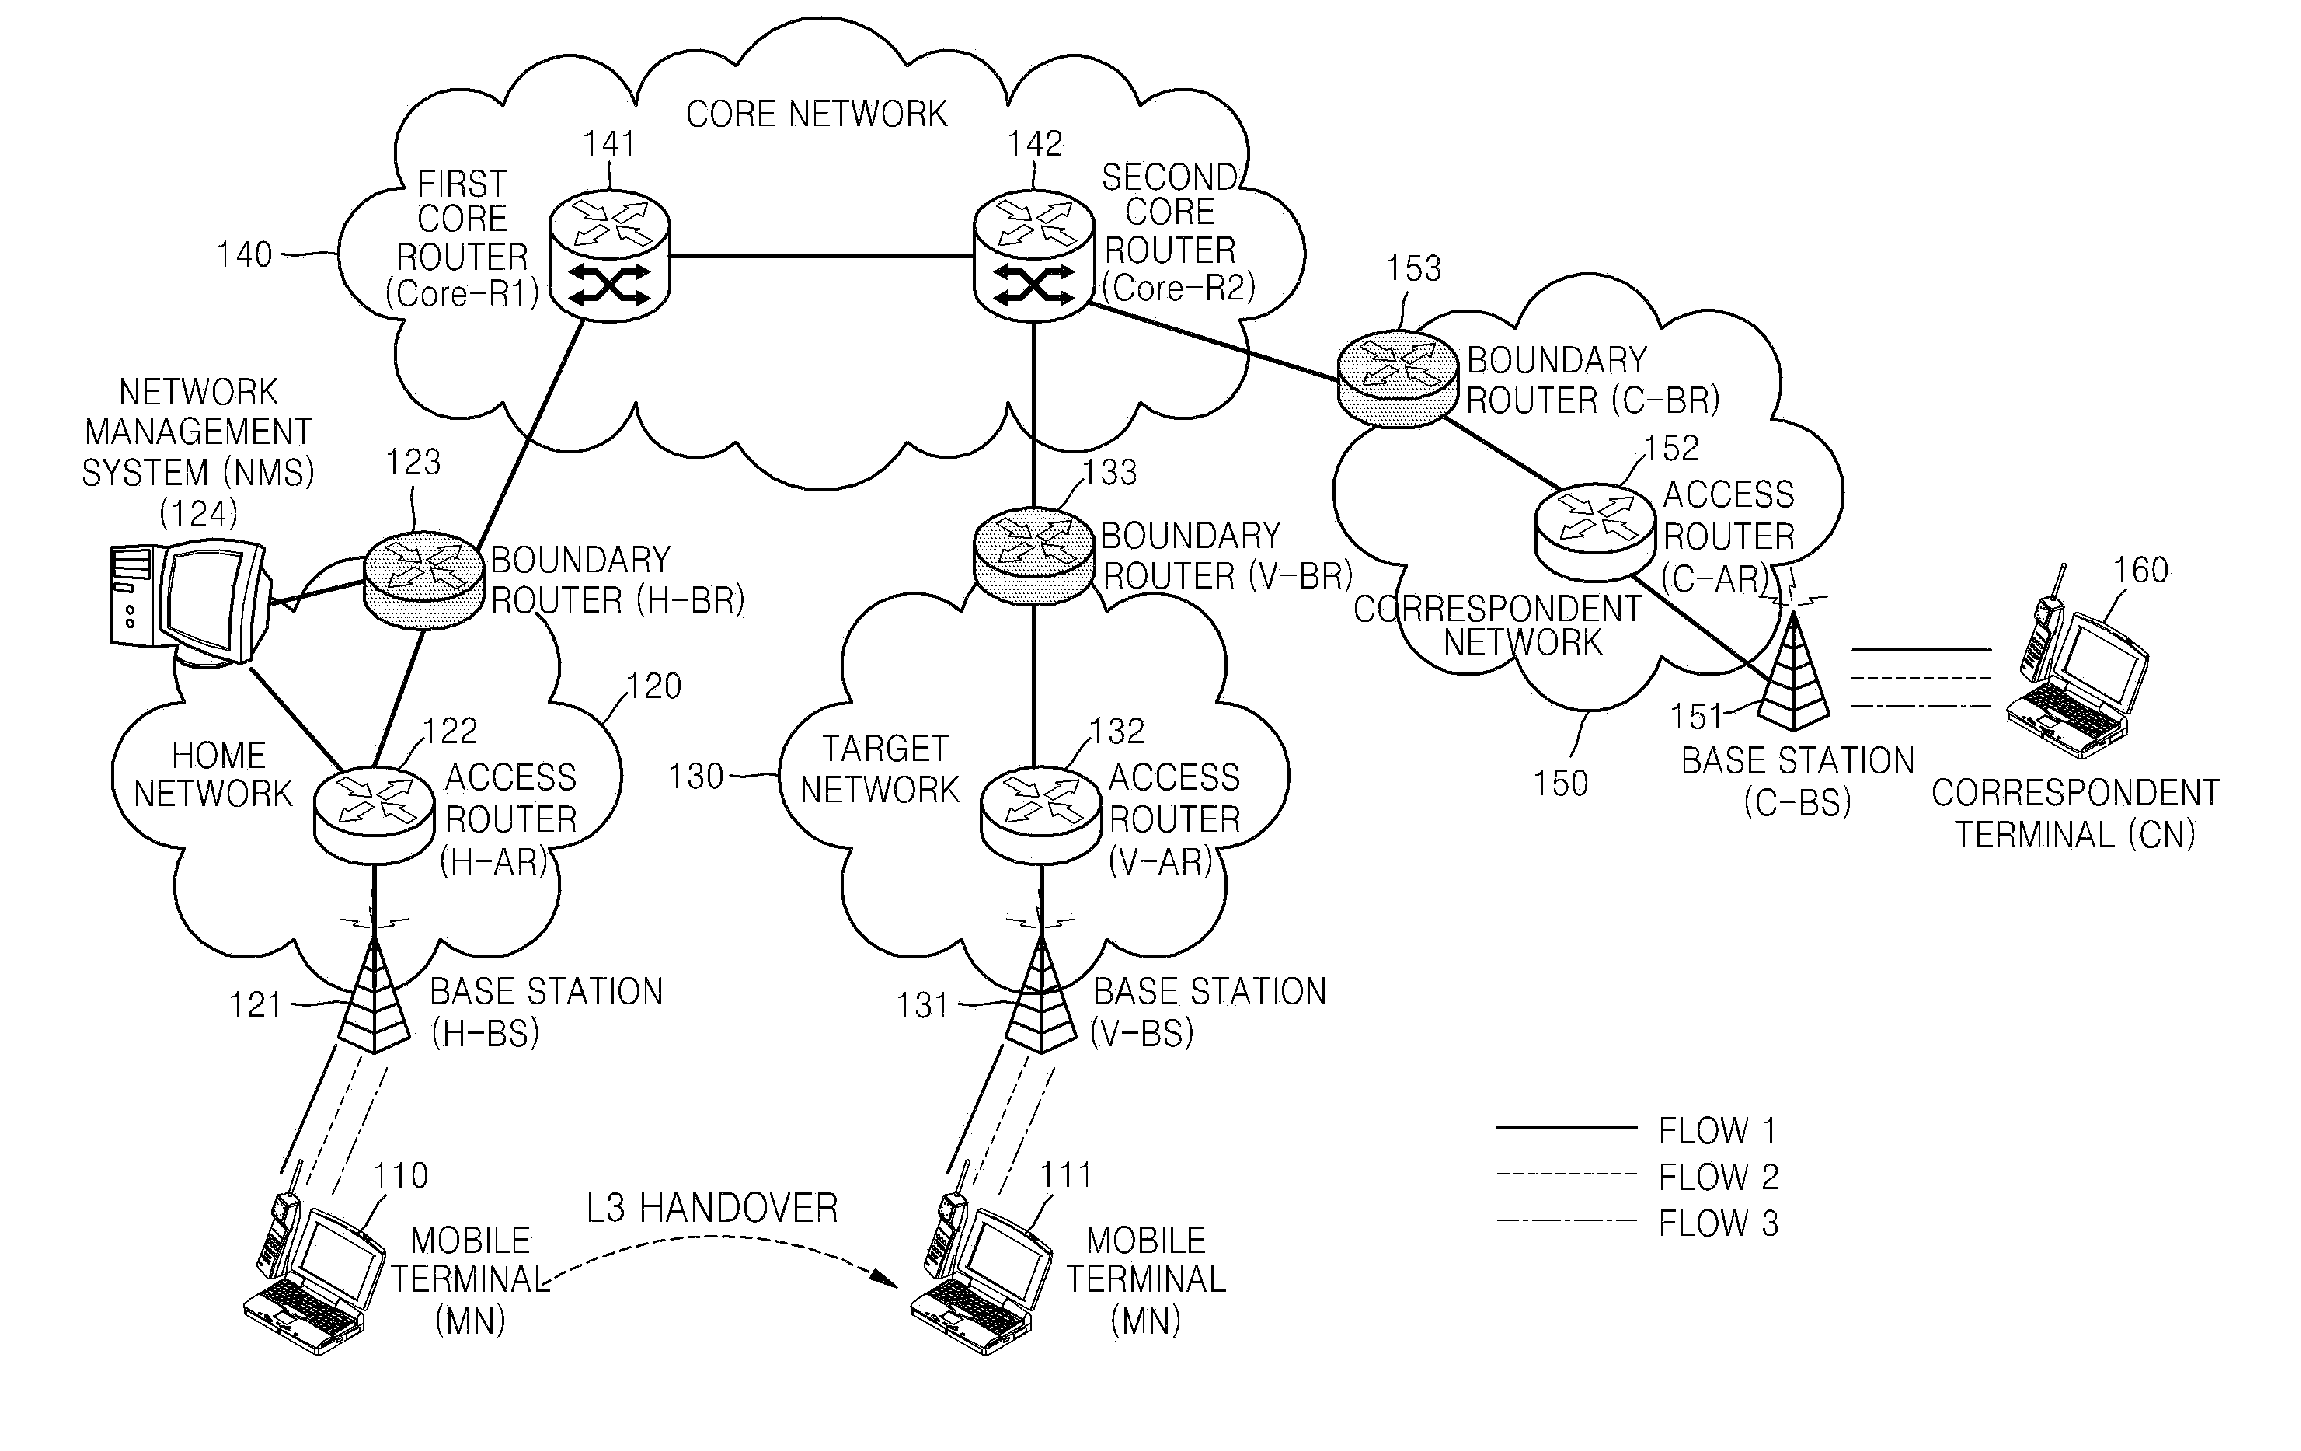 METHOD OF SETTING L3 HANDOVER PATH GUARANTEEING FLOW-BASED QoS IN MOBILE IPv6 NETWORK